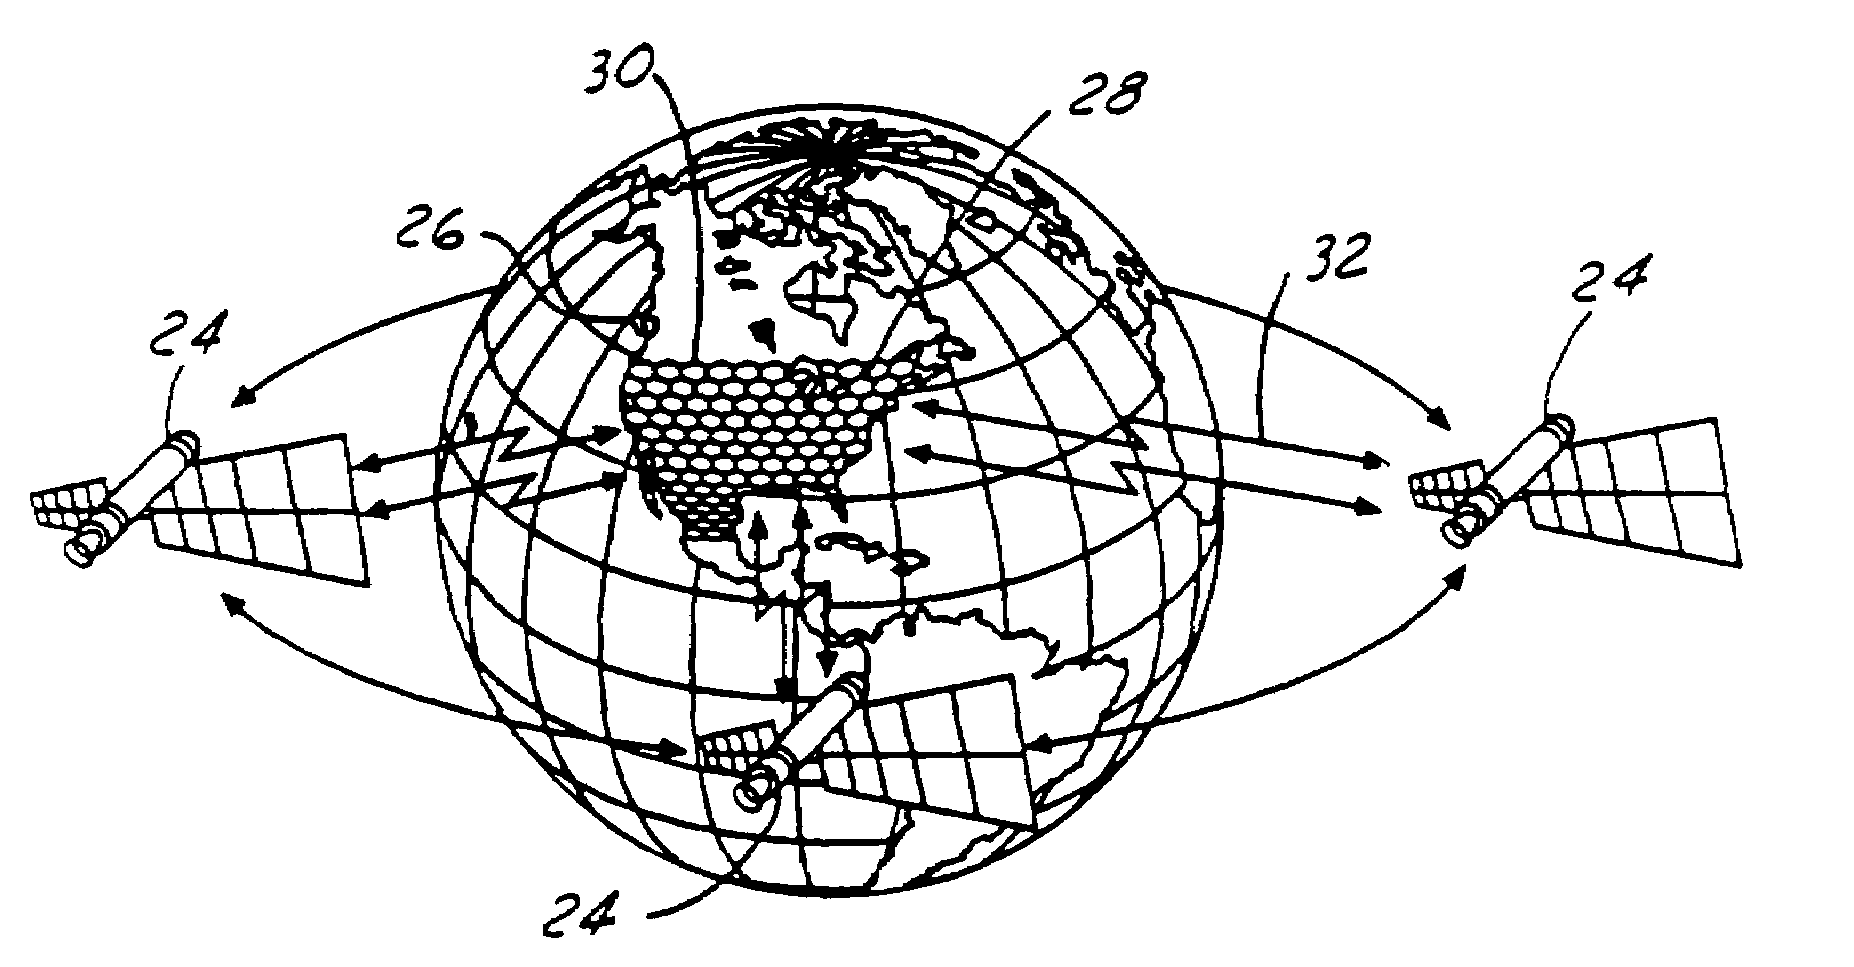 Method and system of efficient spectrum utilization by communications satellites